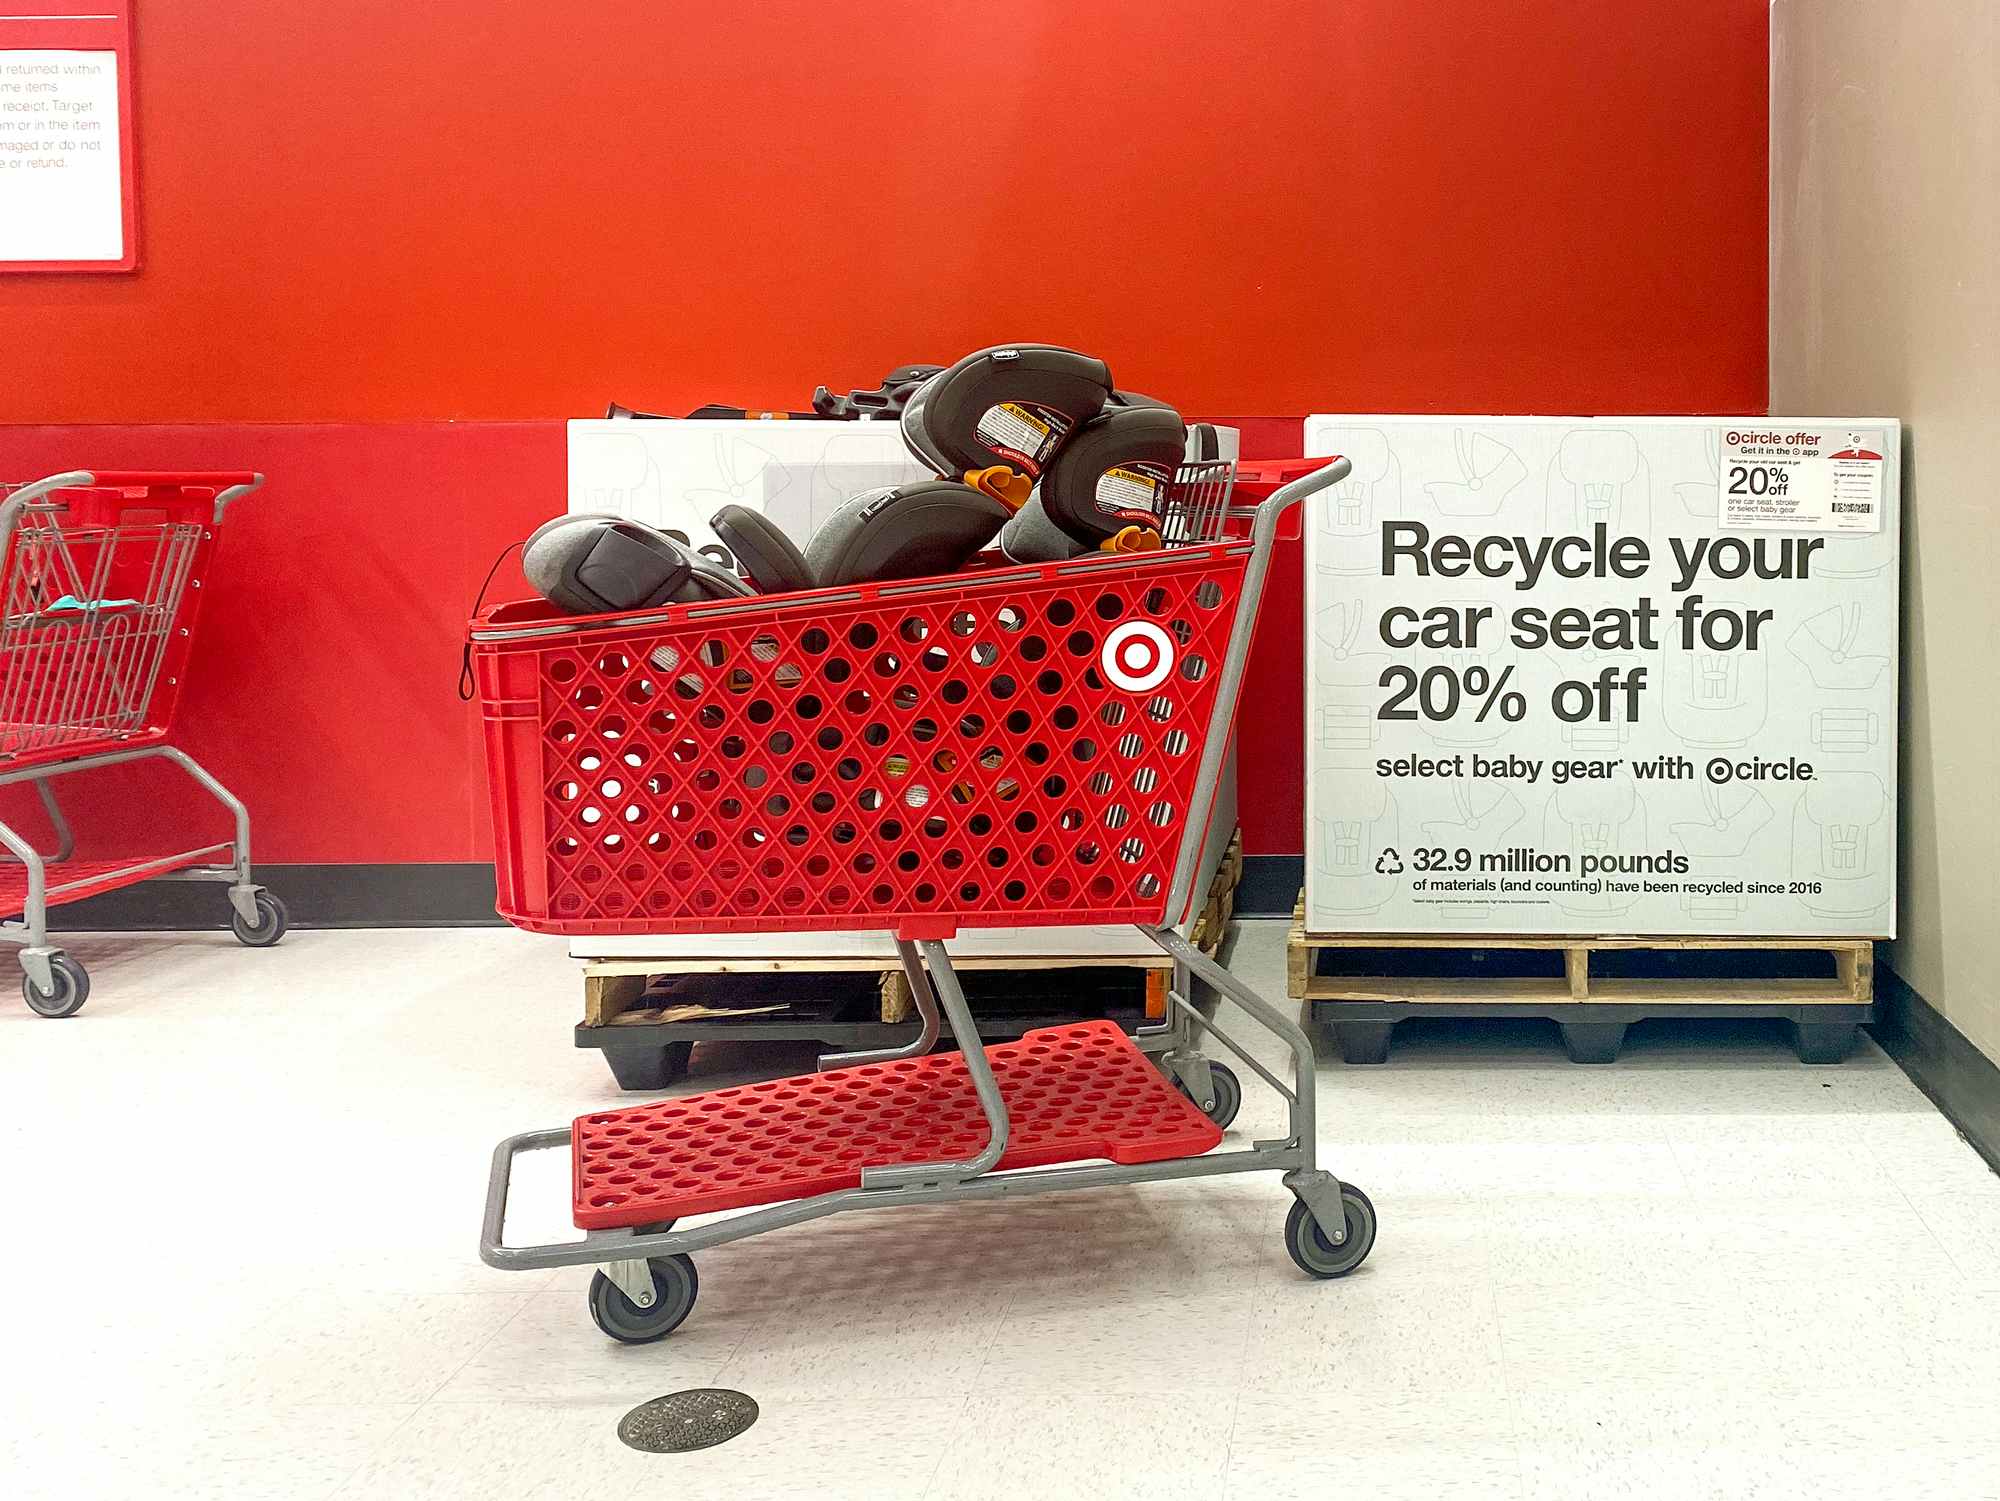 target shopping cart with convertible car seats to be returned at car seat trade-in event